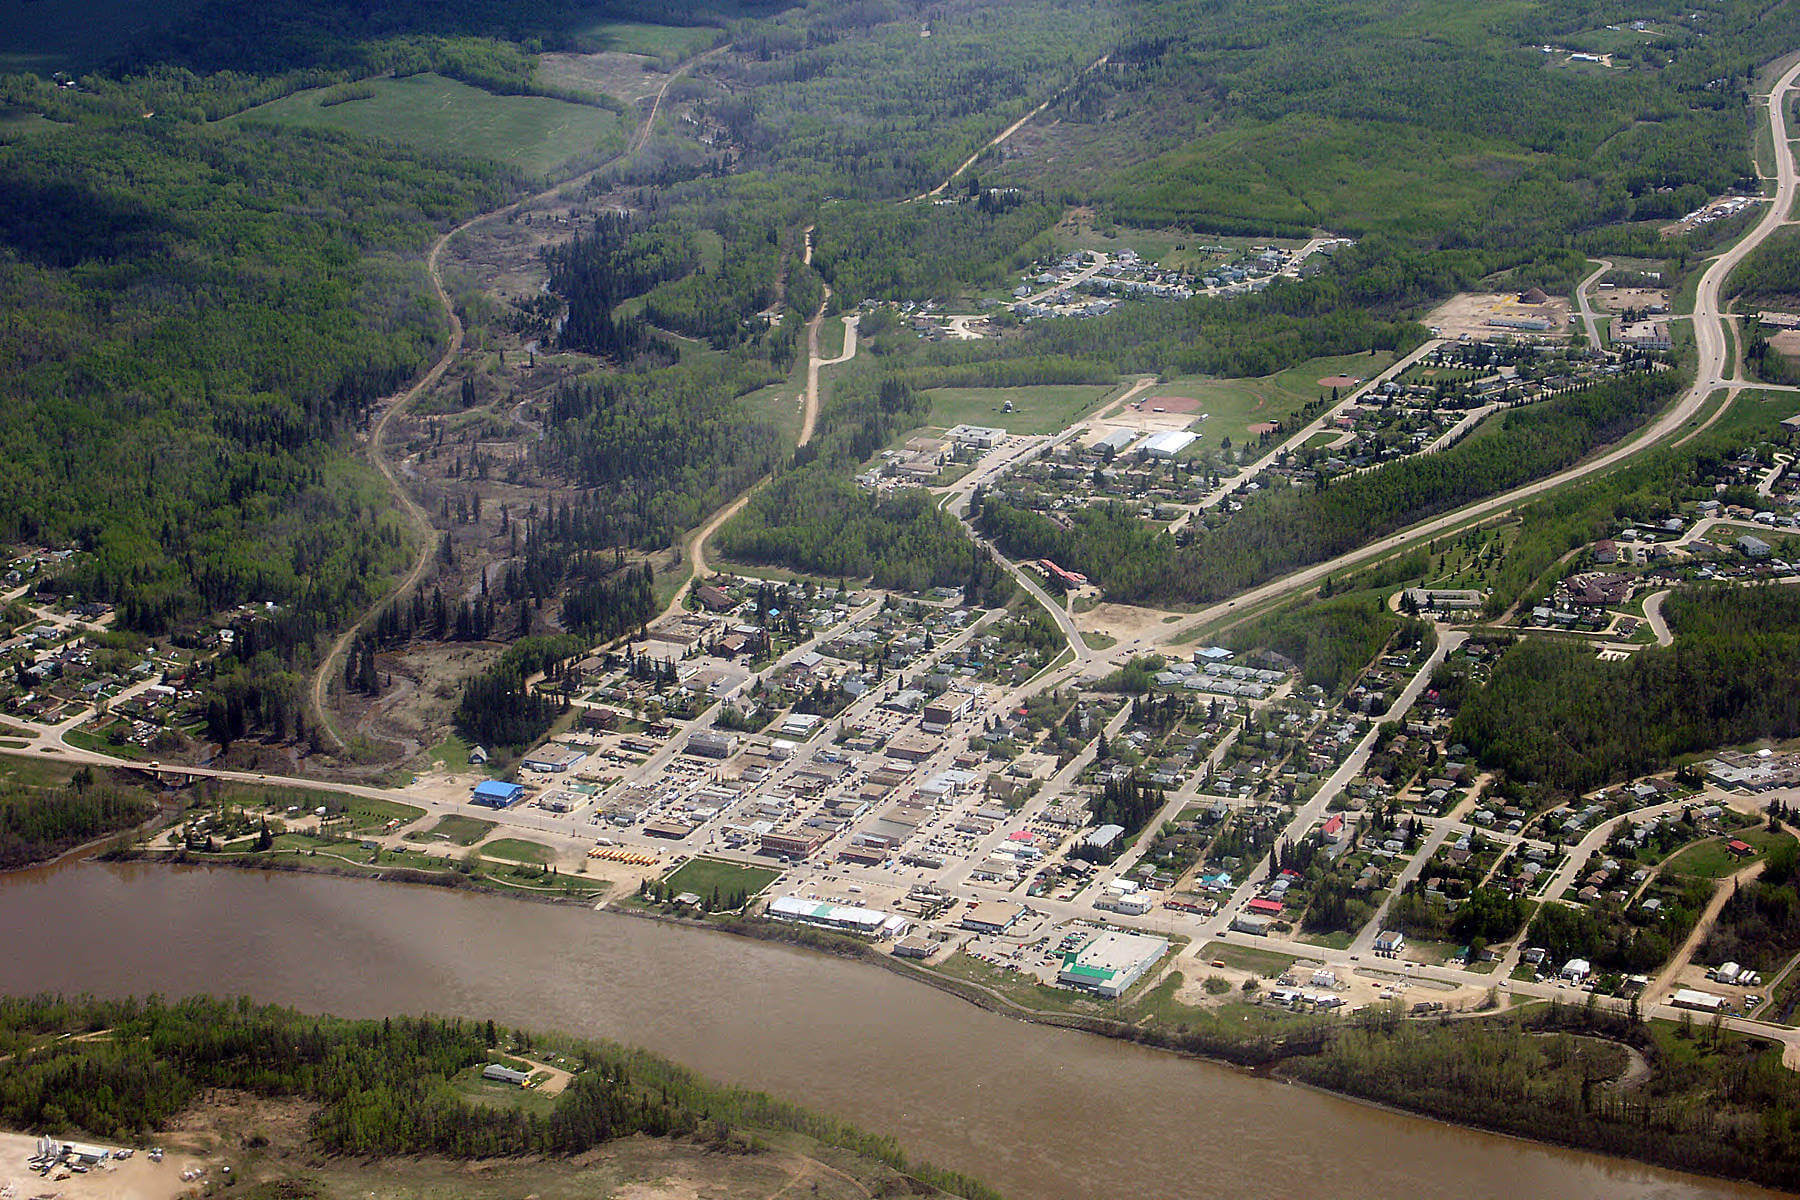 Aerial view of the town of Athabasca